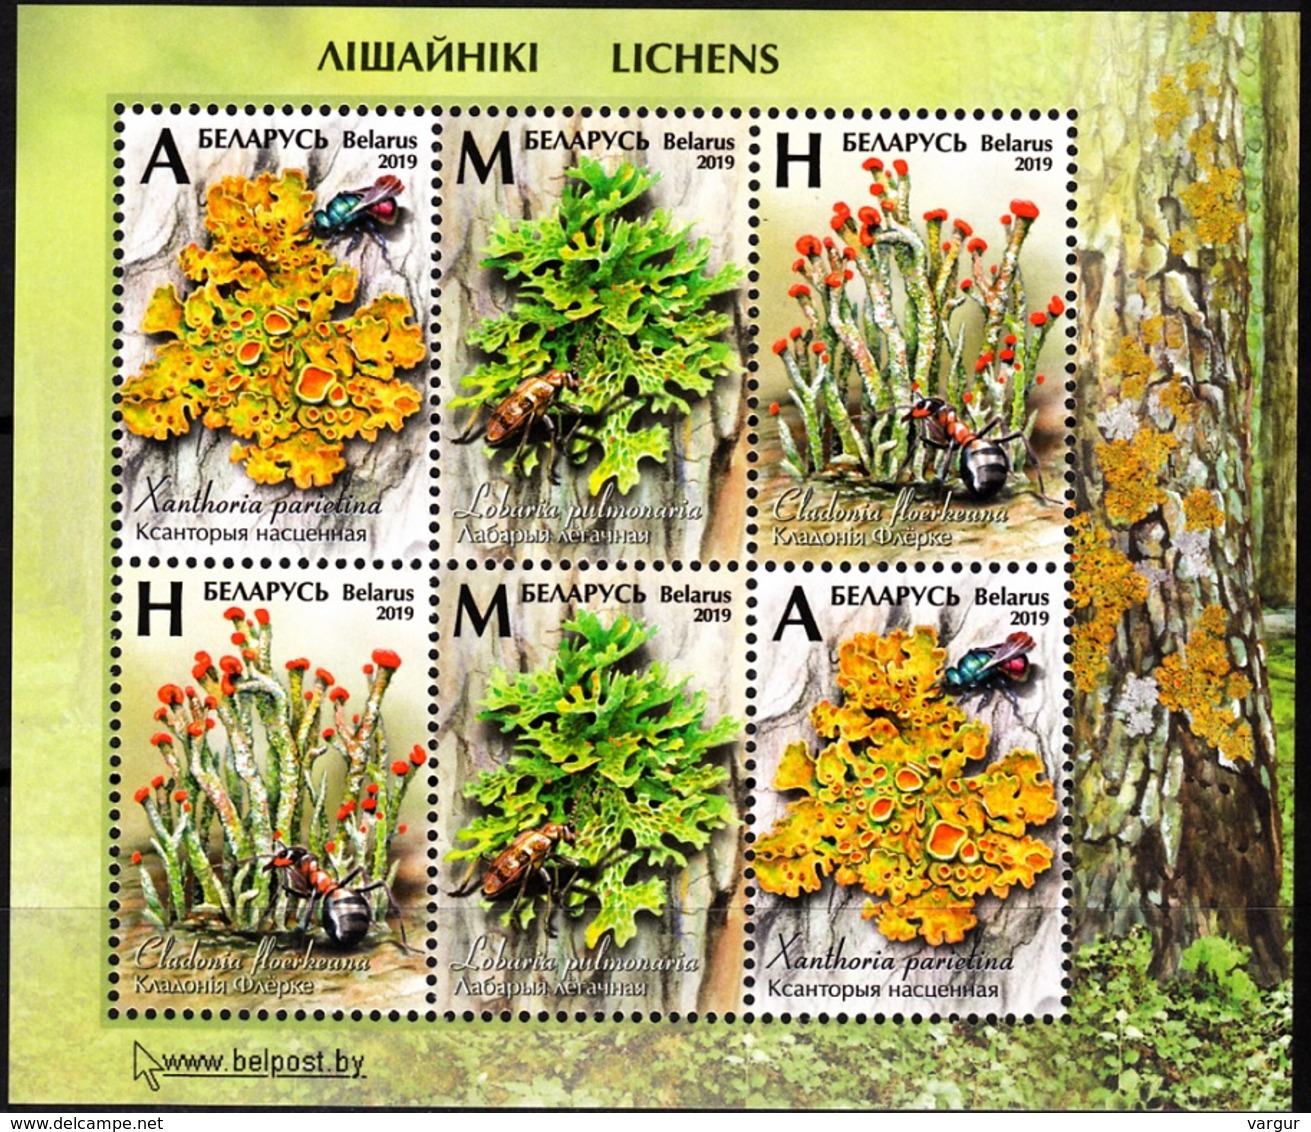 BELARUS 2019-12 FLORA Plants Fungi: Lichens And Insects. Souvenir Sheet, MNH - Mushrooms